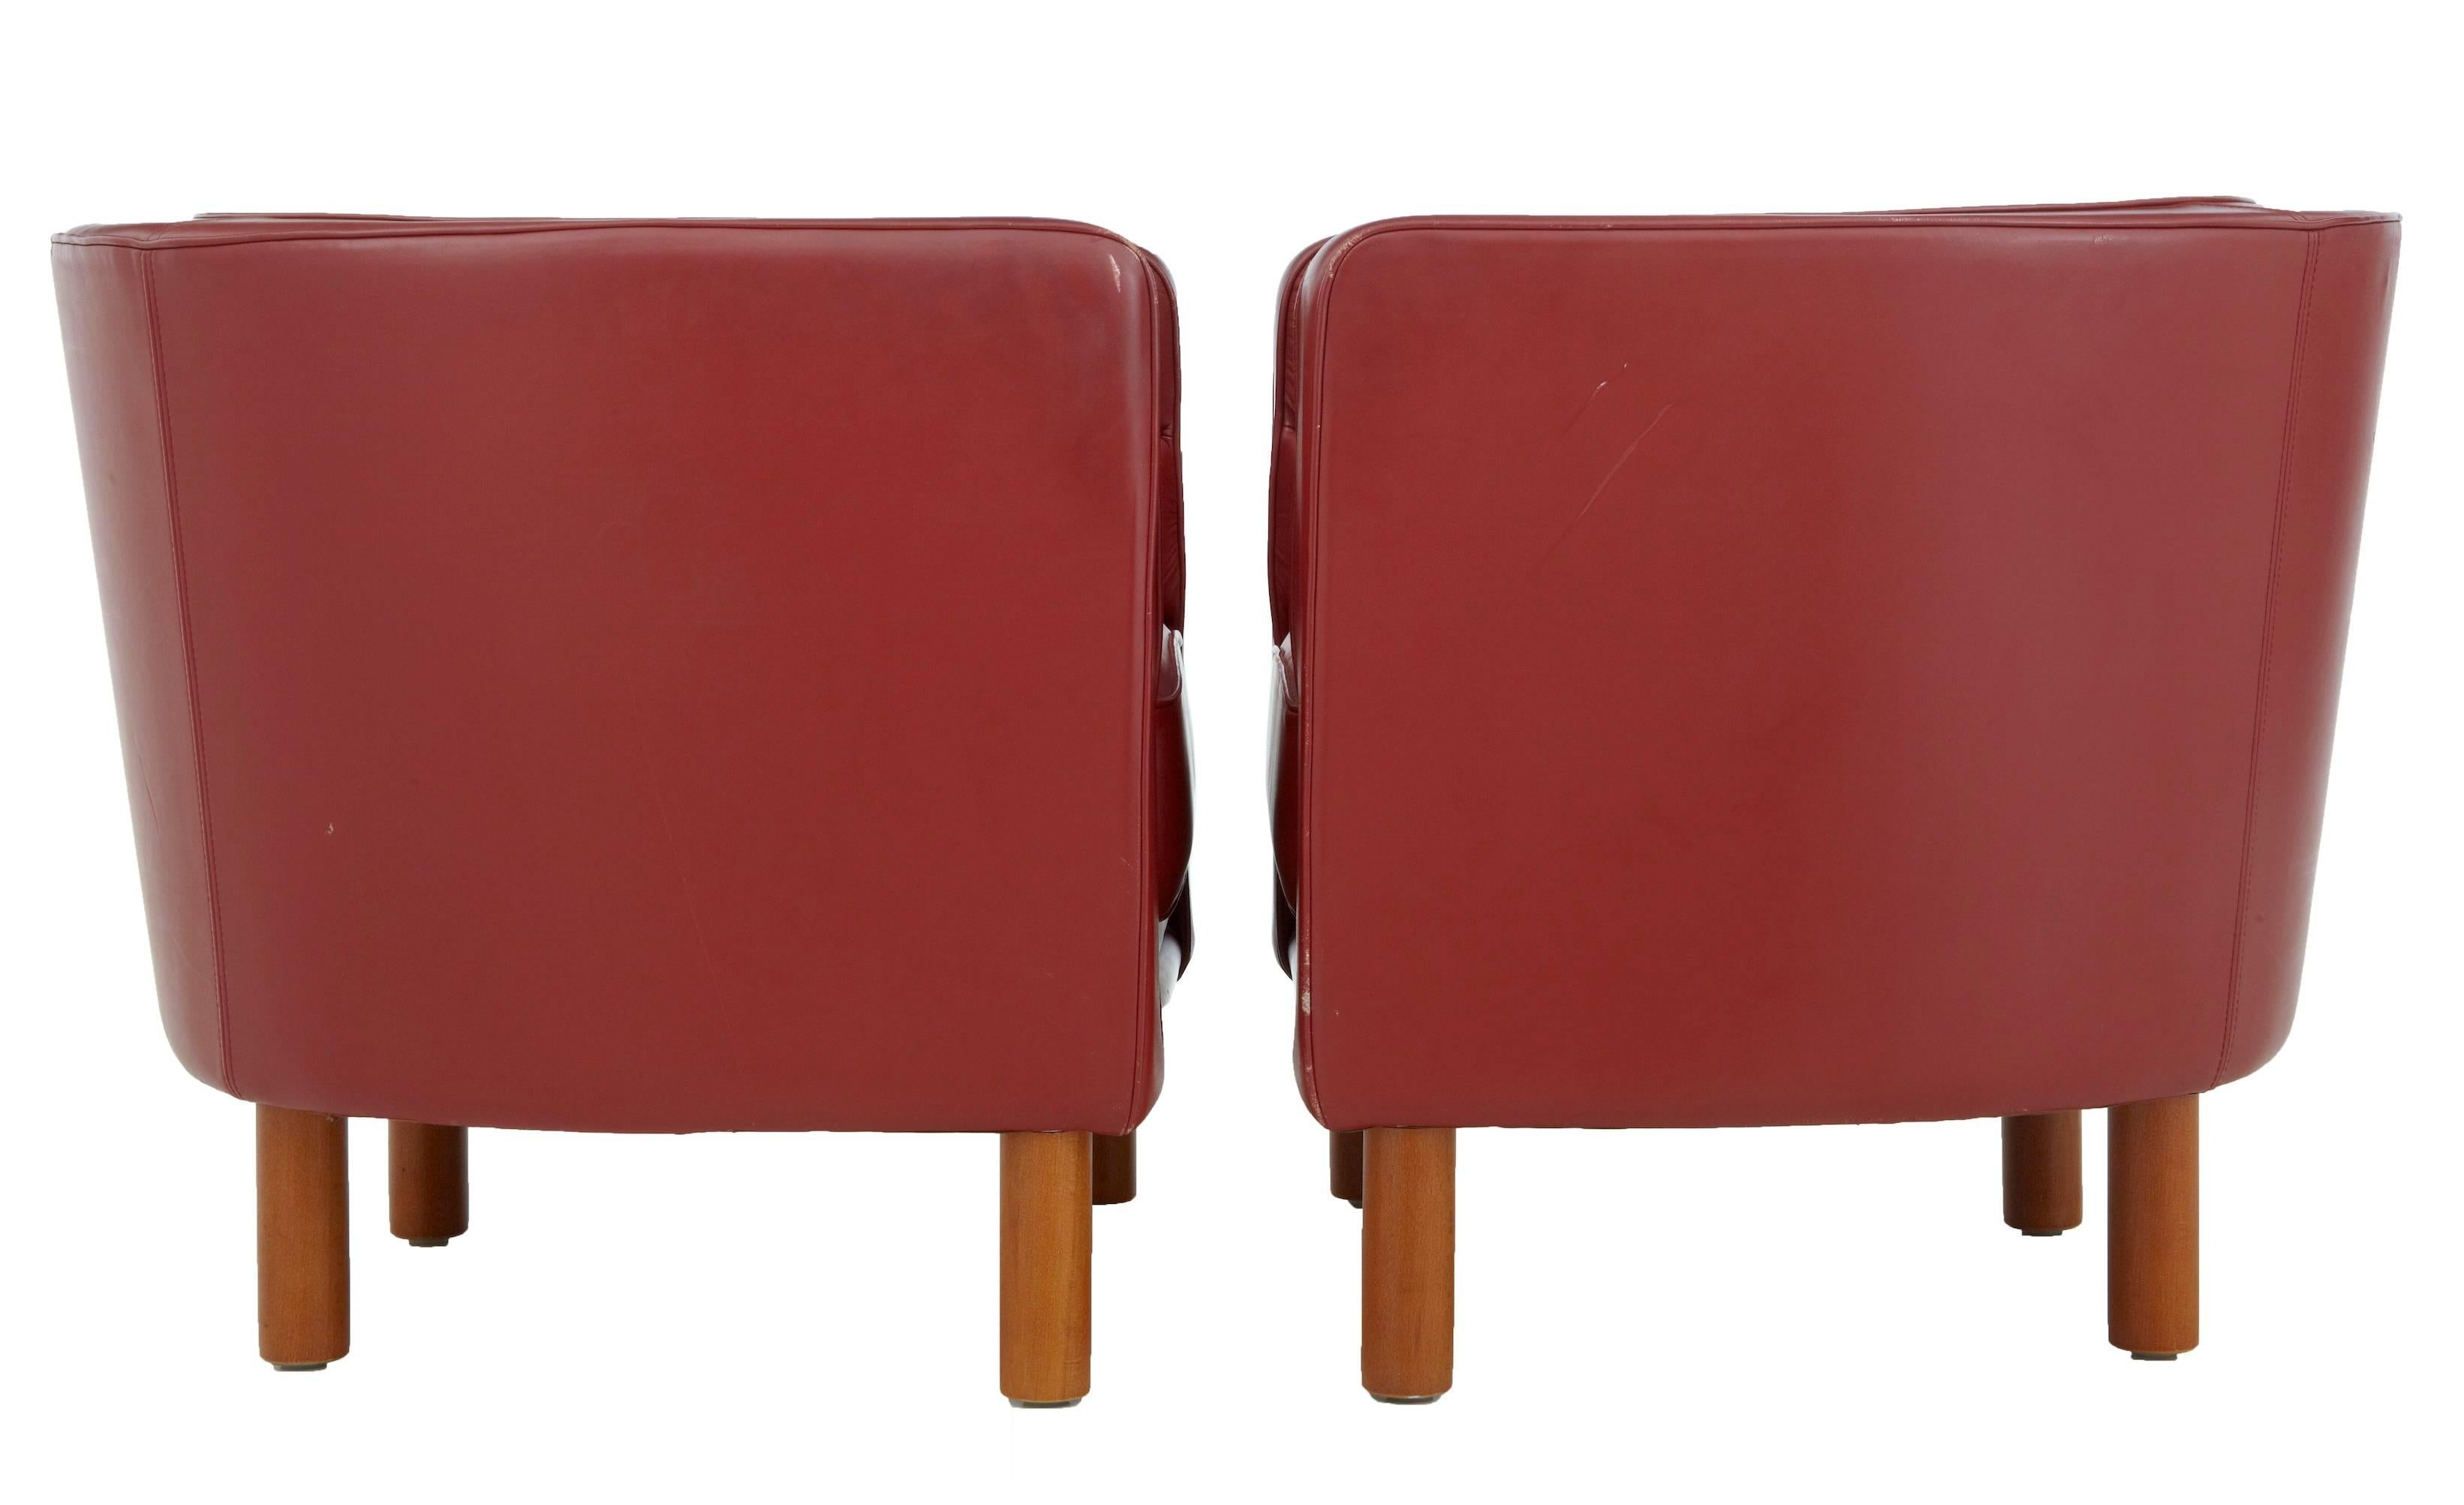 Upholstered in rusty red leather. Beech round legs and exposed front under frame. Very comfortable and stylish. Some minor wear to leather piping, odd mark to leather around the outside, minor scuff marks to wood frame. We have four pairs of these